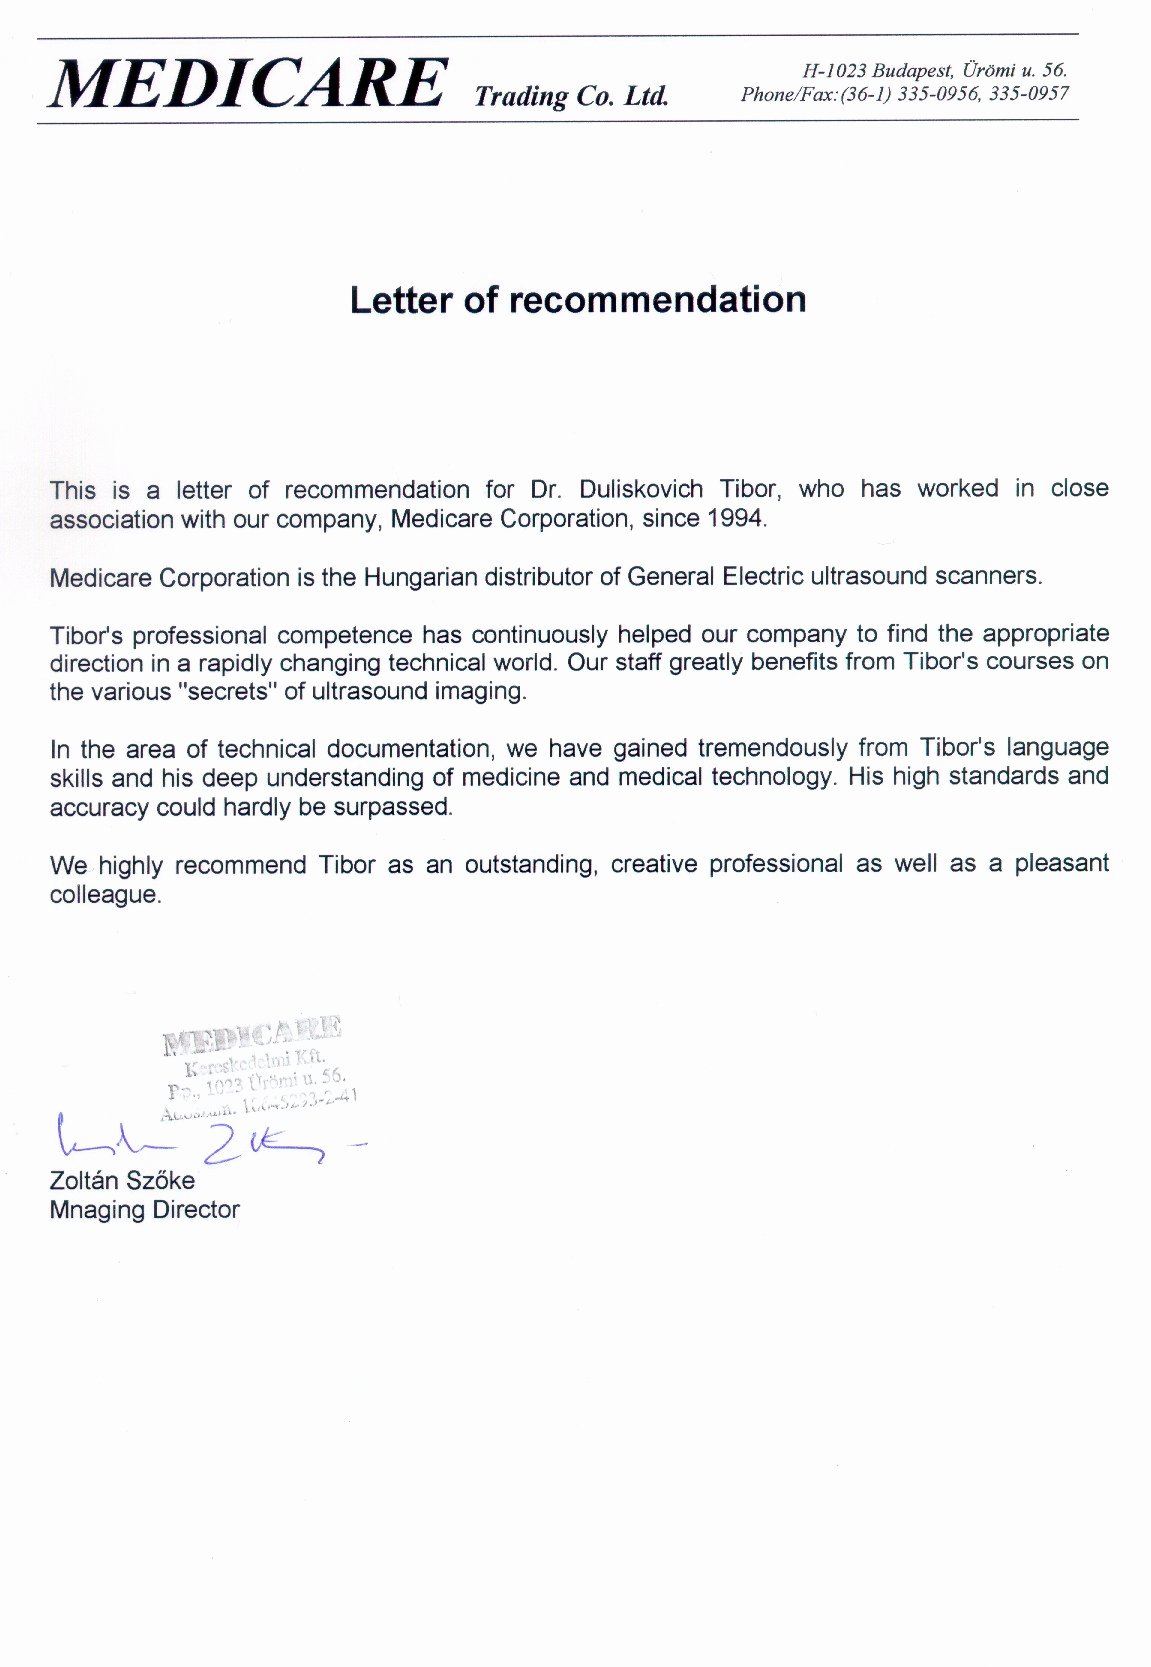 Physician assistant Letter Of Recommendation Unique Letter Of Re Mendation Medical assistant